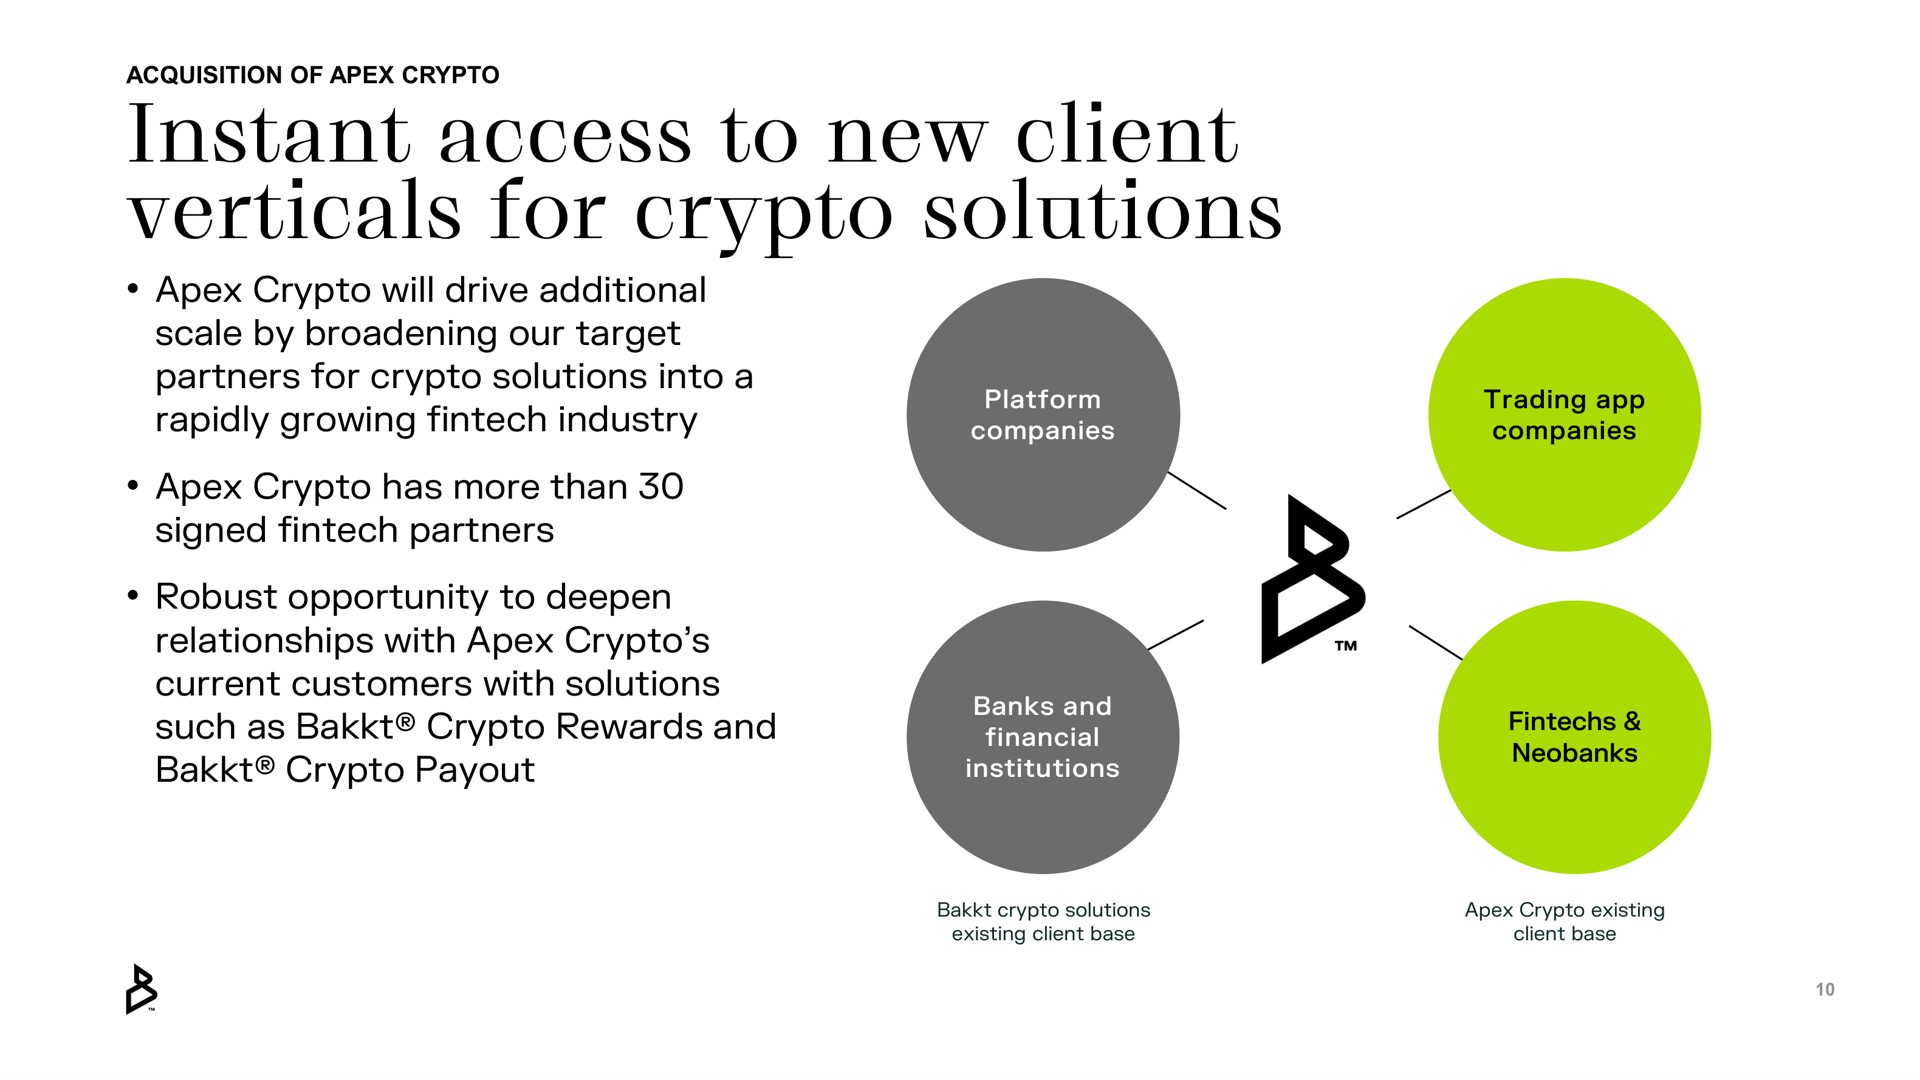 instant access to new client verticals for solutions | Bakkt